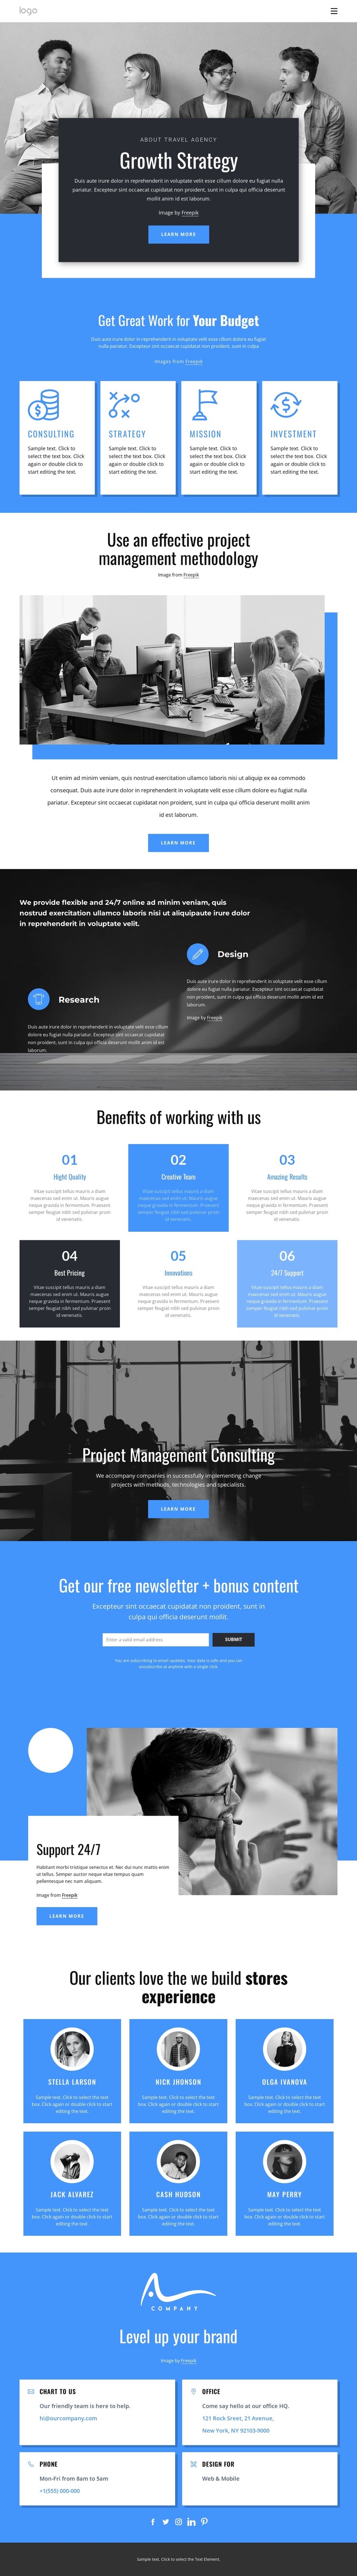 Growth strategy consulting company Web Design